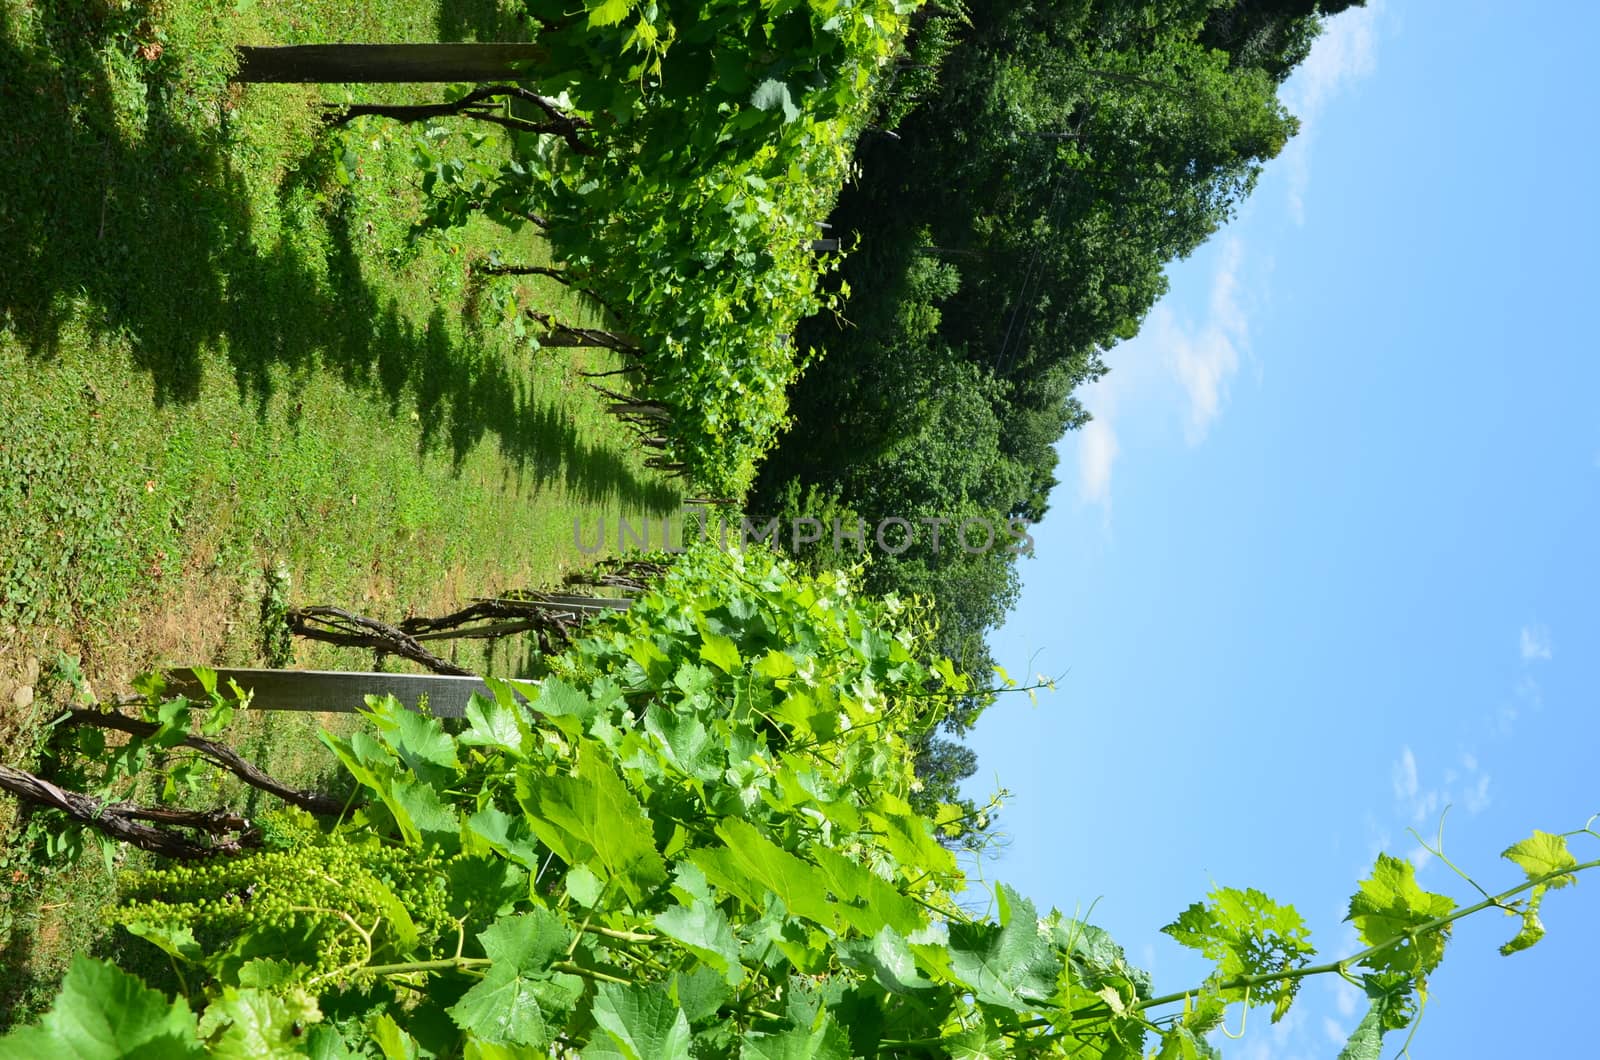 Grapes on the vine in rural North Carolina. Shown in rows on a hill.